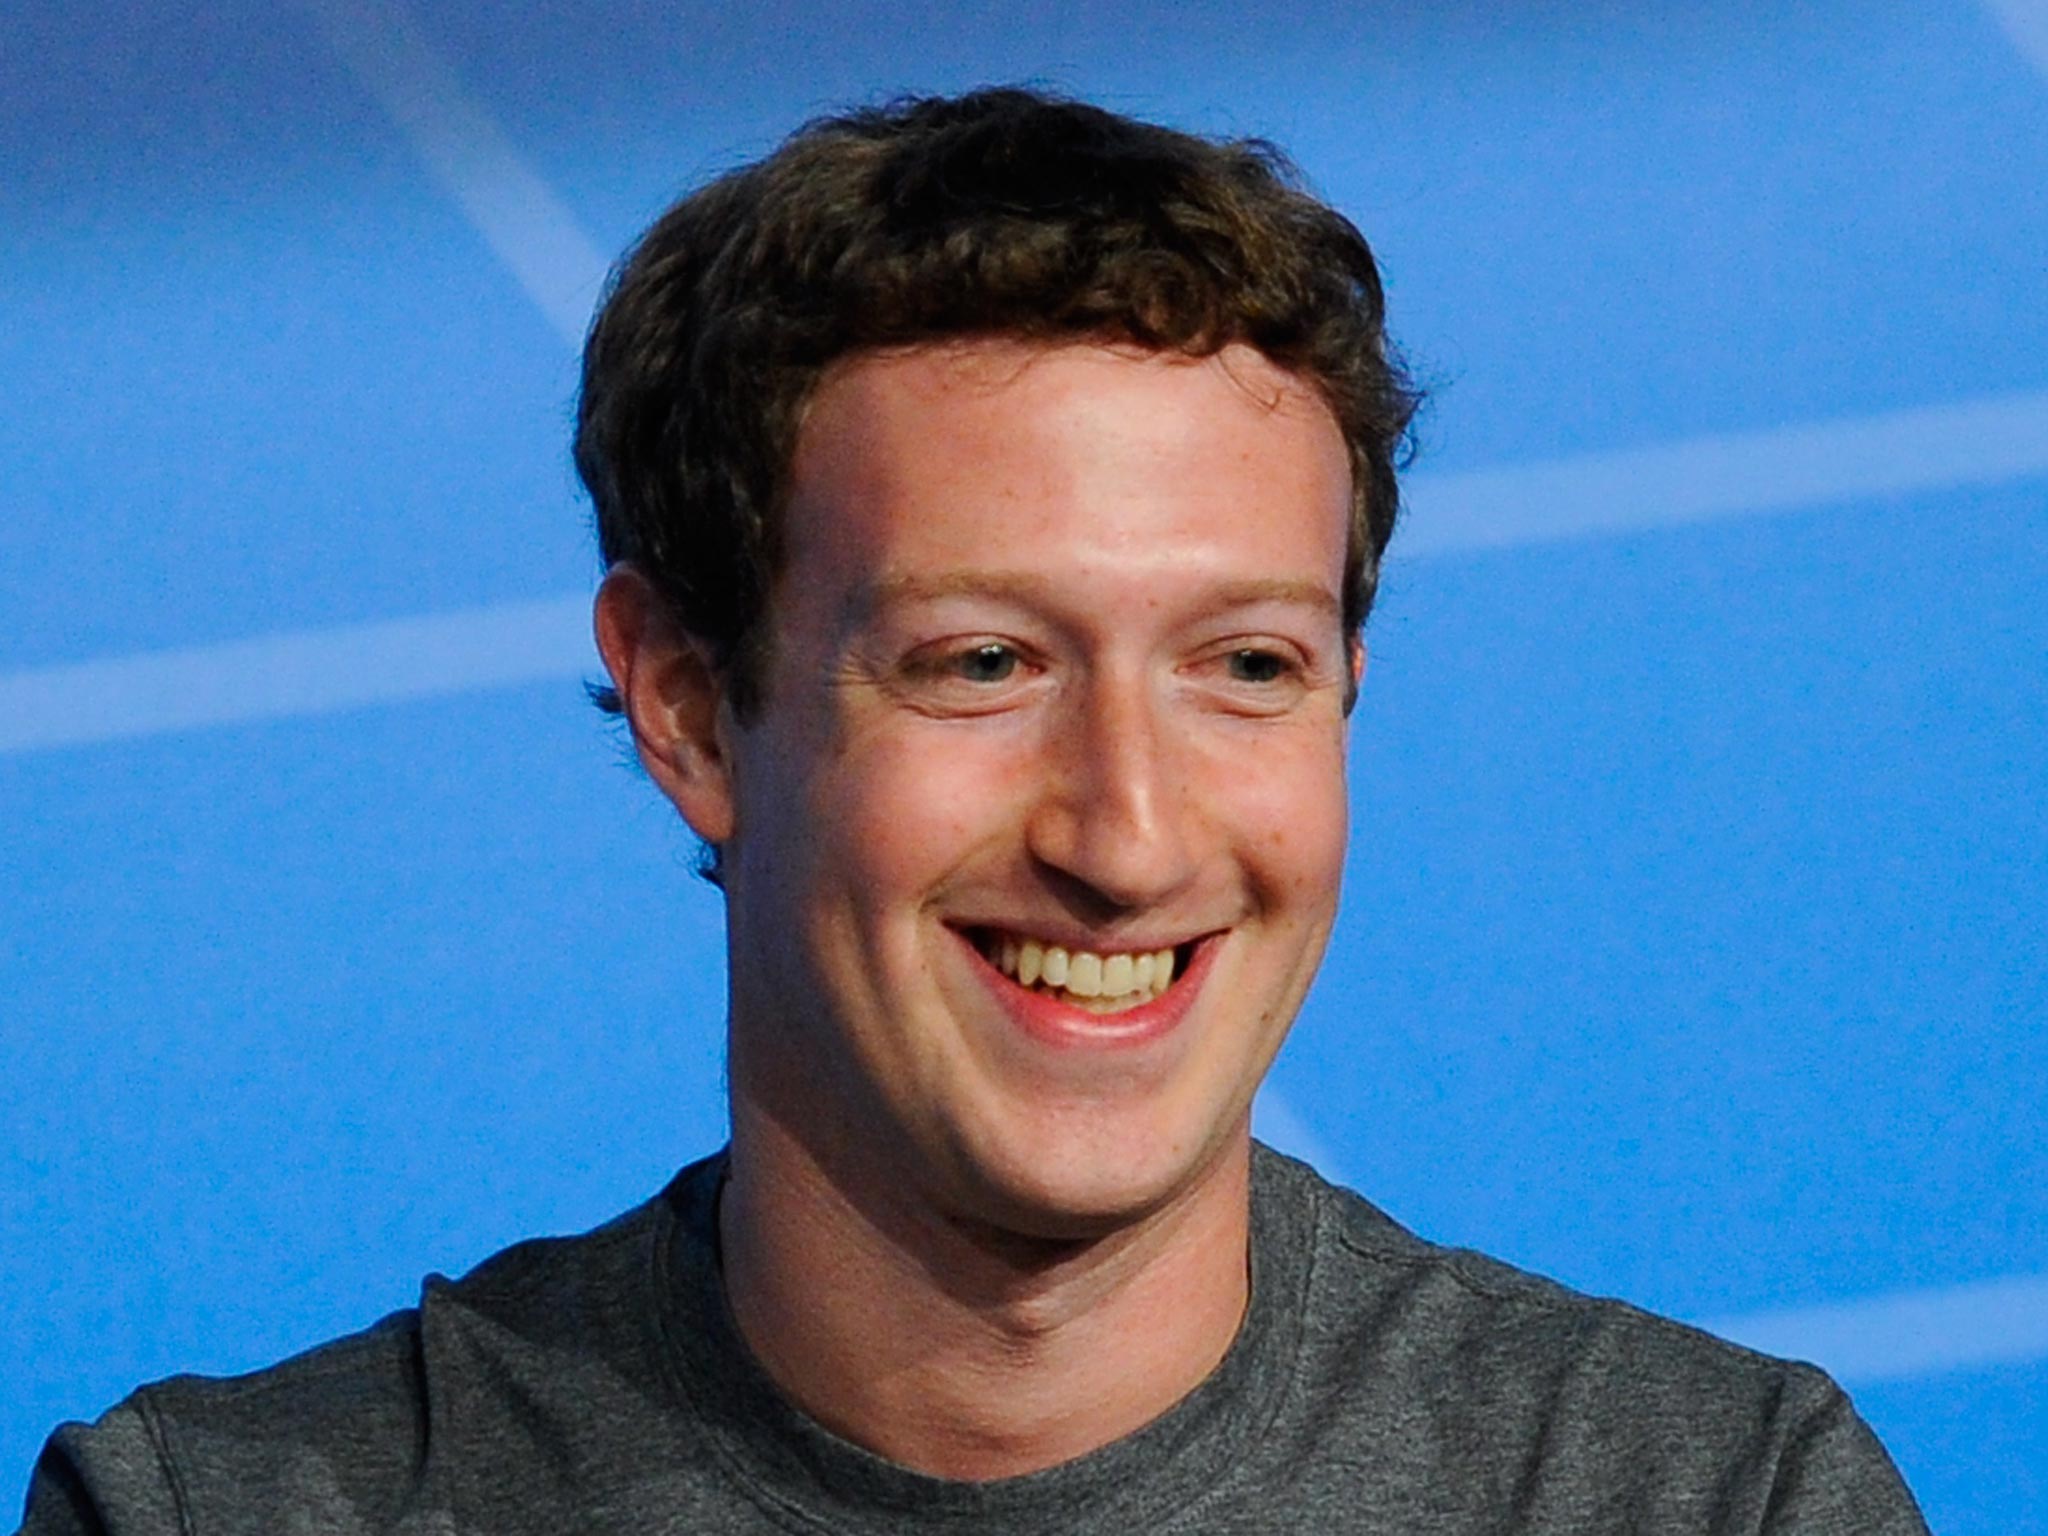 Facebook co-founder Mark Zuckerburg has tried to learn Mandarin or send one thank-you note a day in previous years